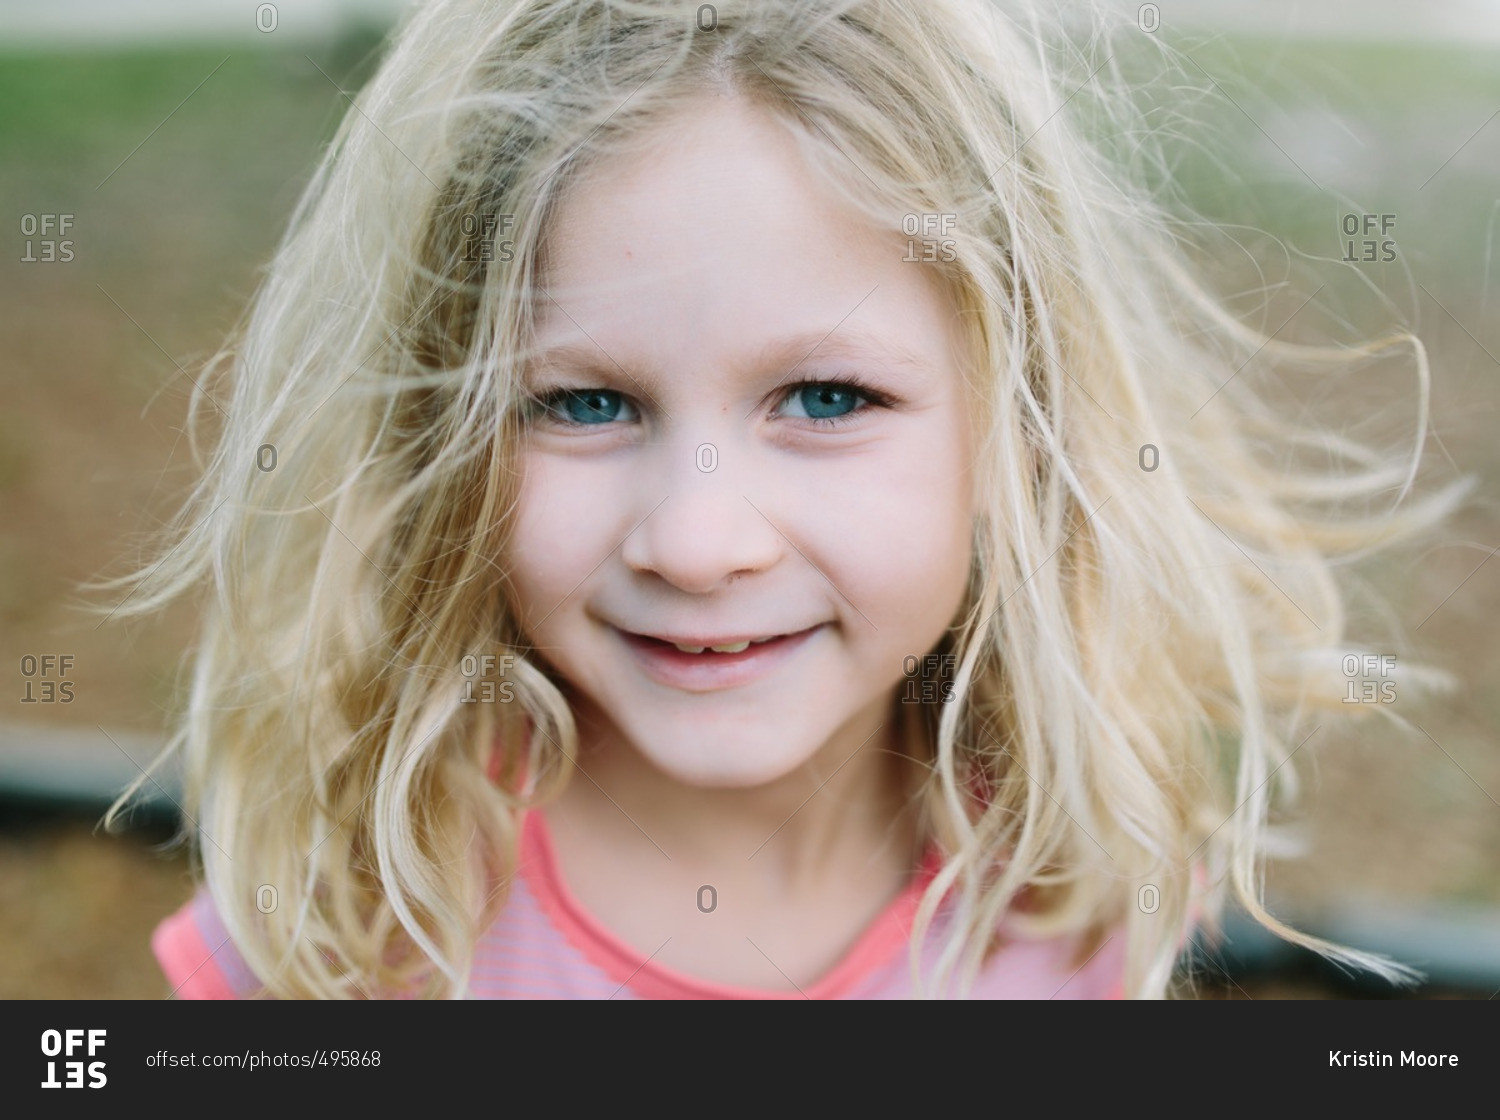 Close-up portrait of a beautiful young girl with messy blond hair